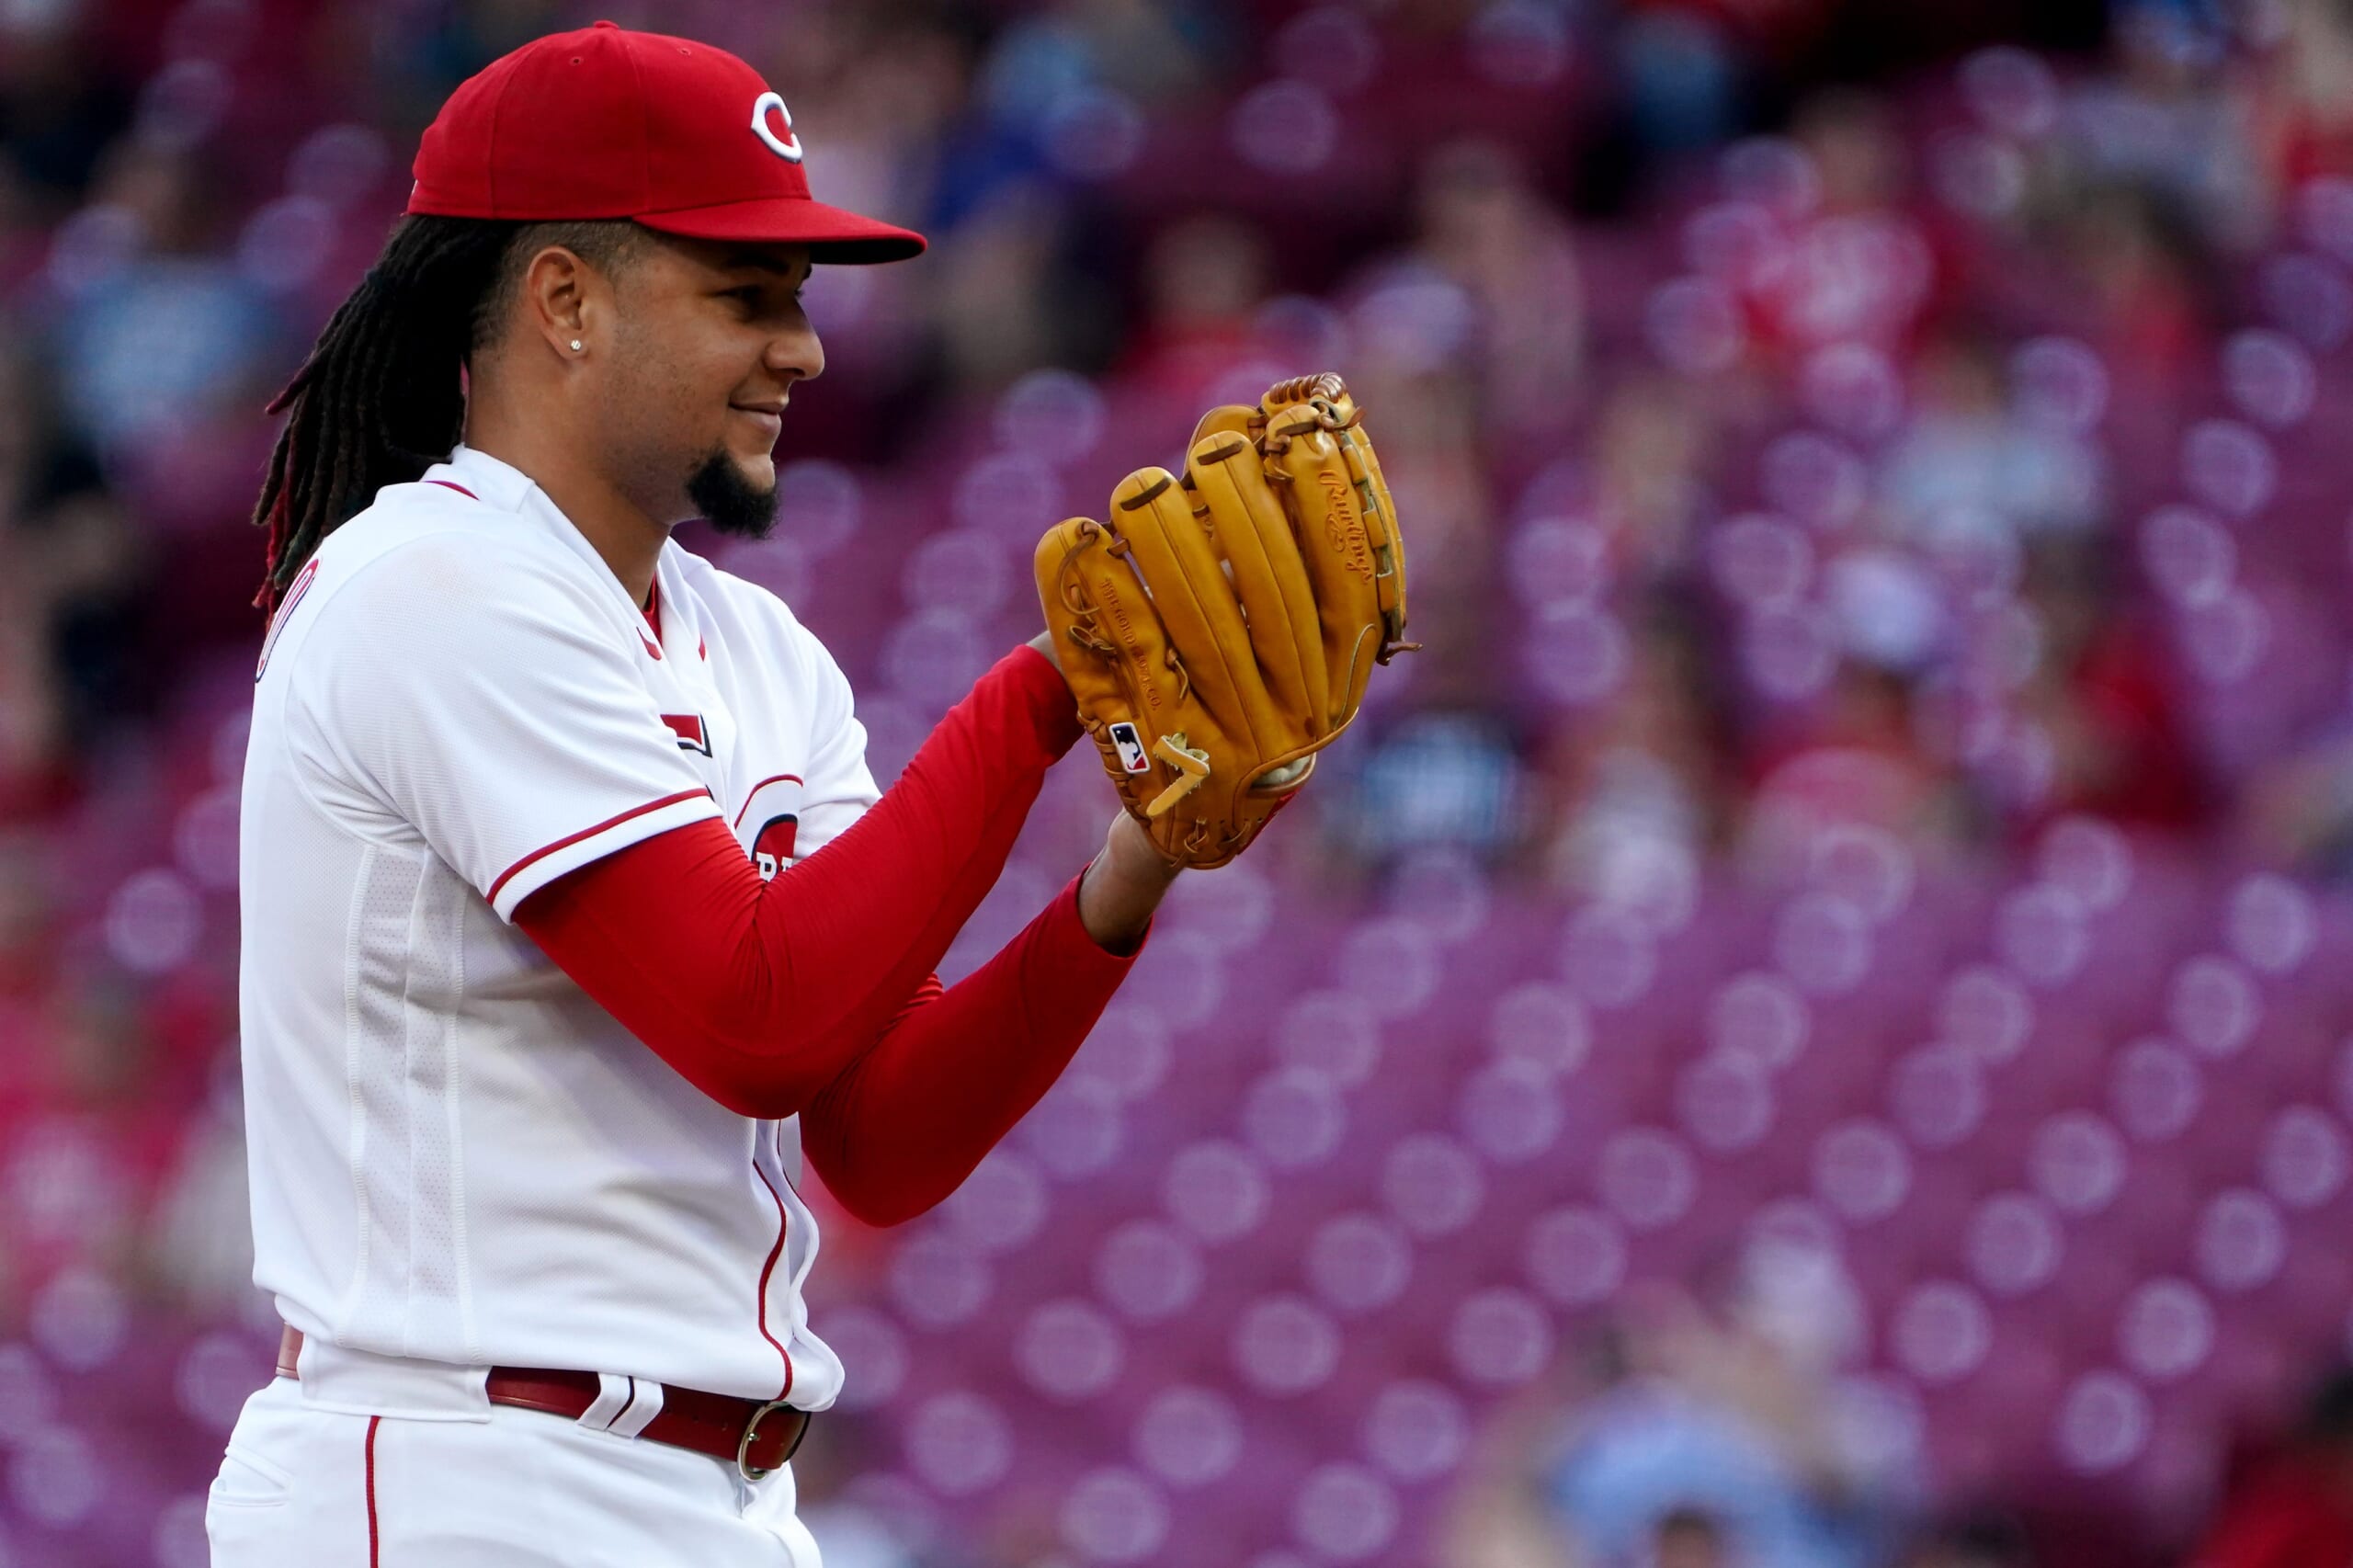 There's only one Luis Castillo': A year later, blockbuster trade